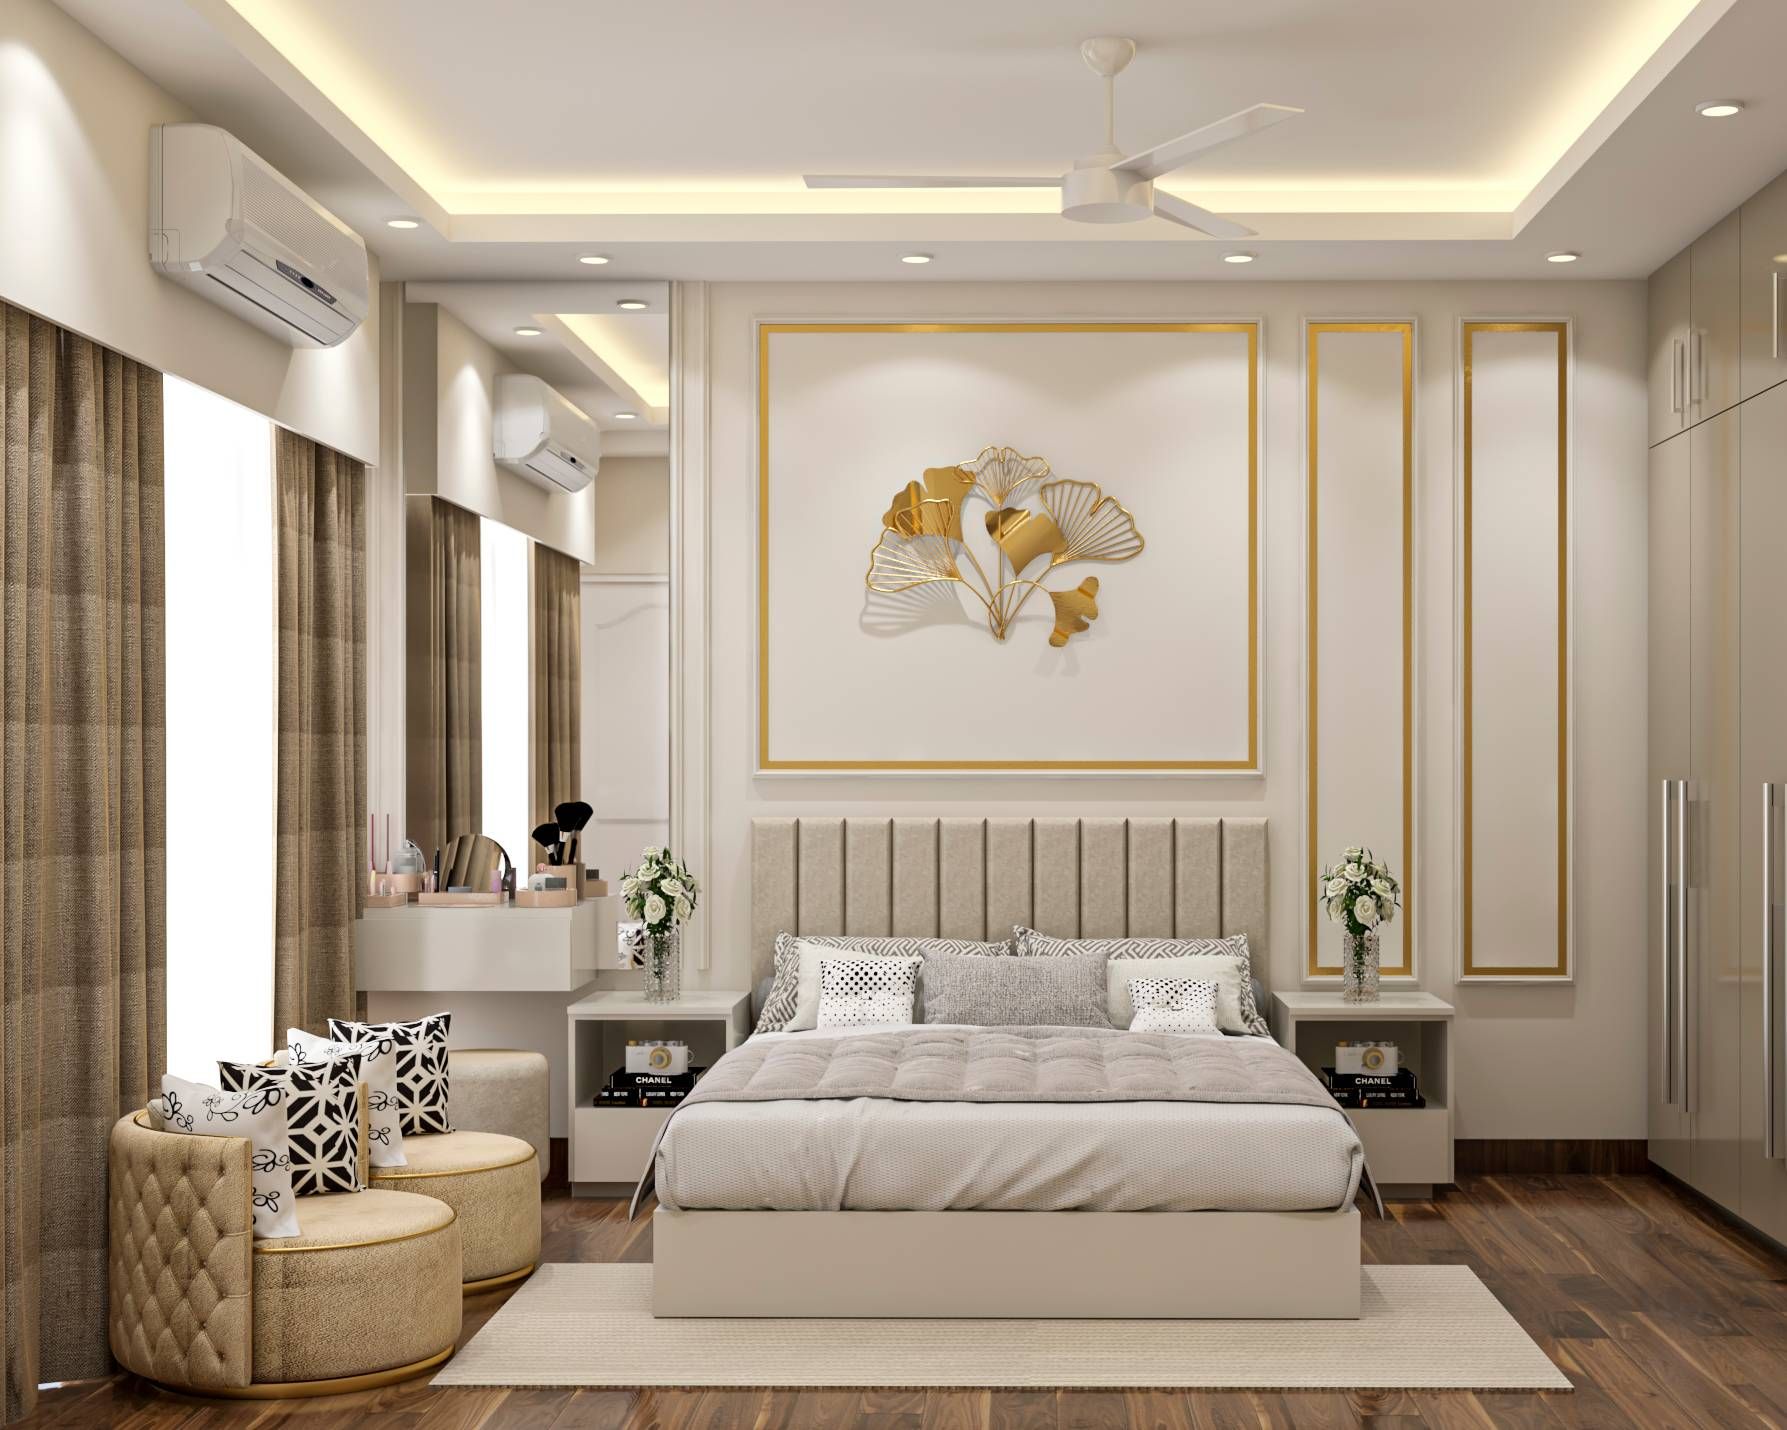 Classic Spacious Master Bedroom With Wooden Flooring And False Ceiling